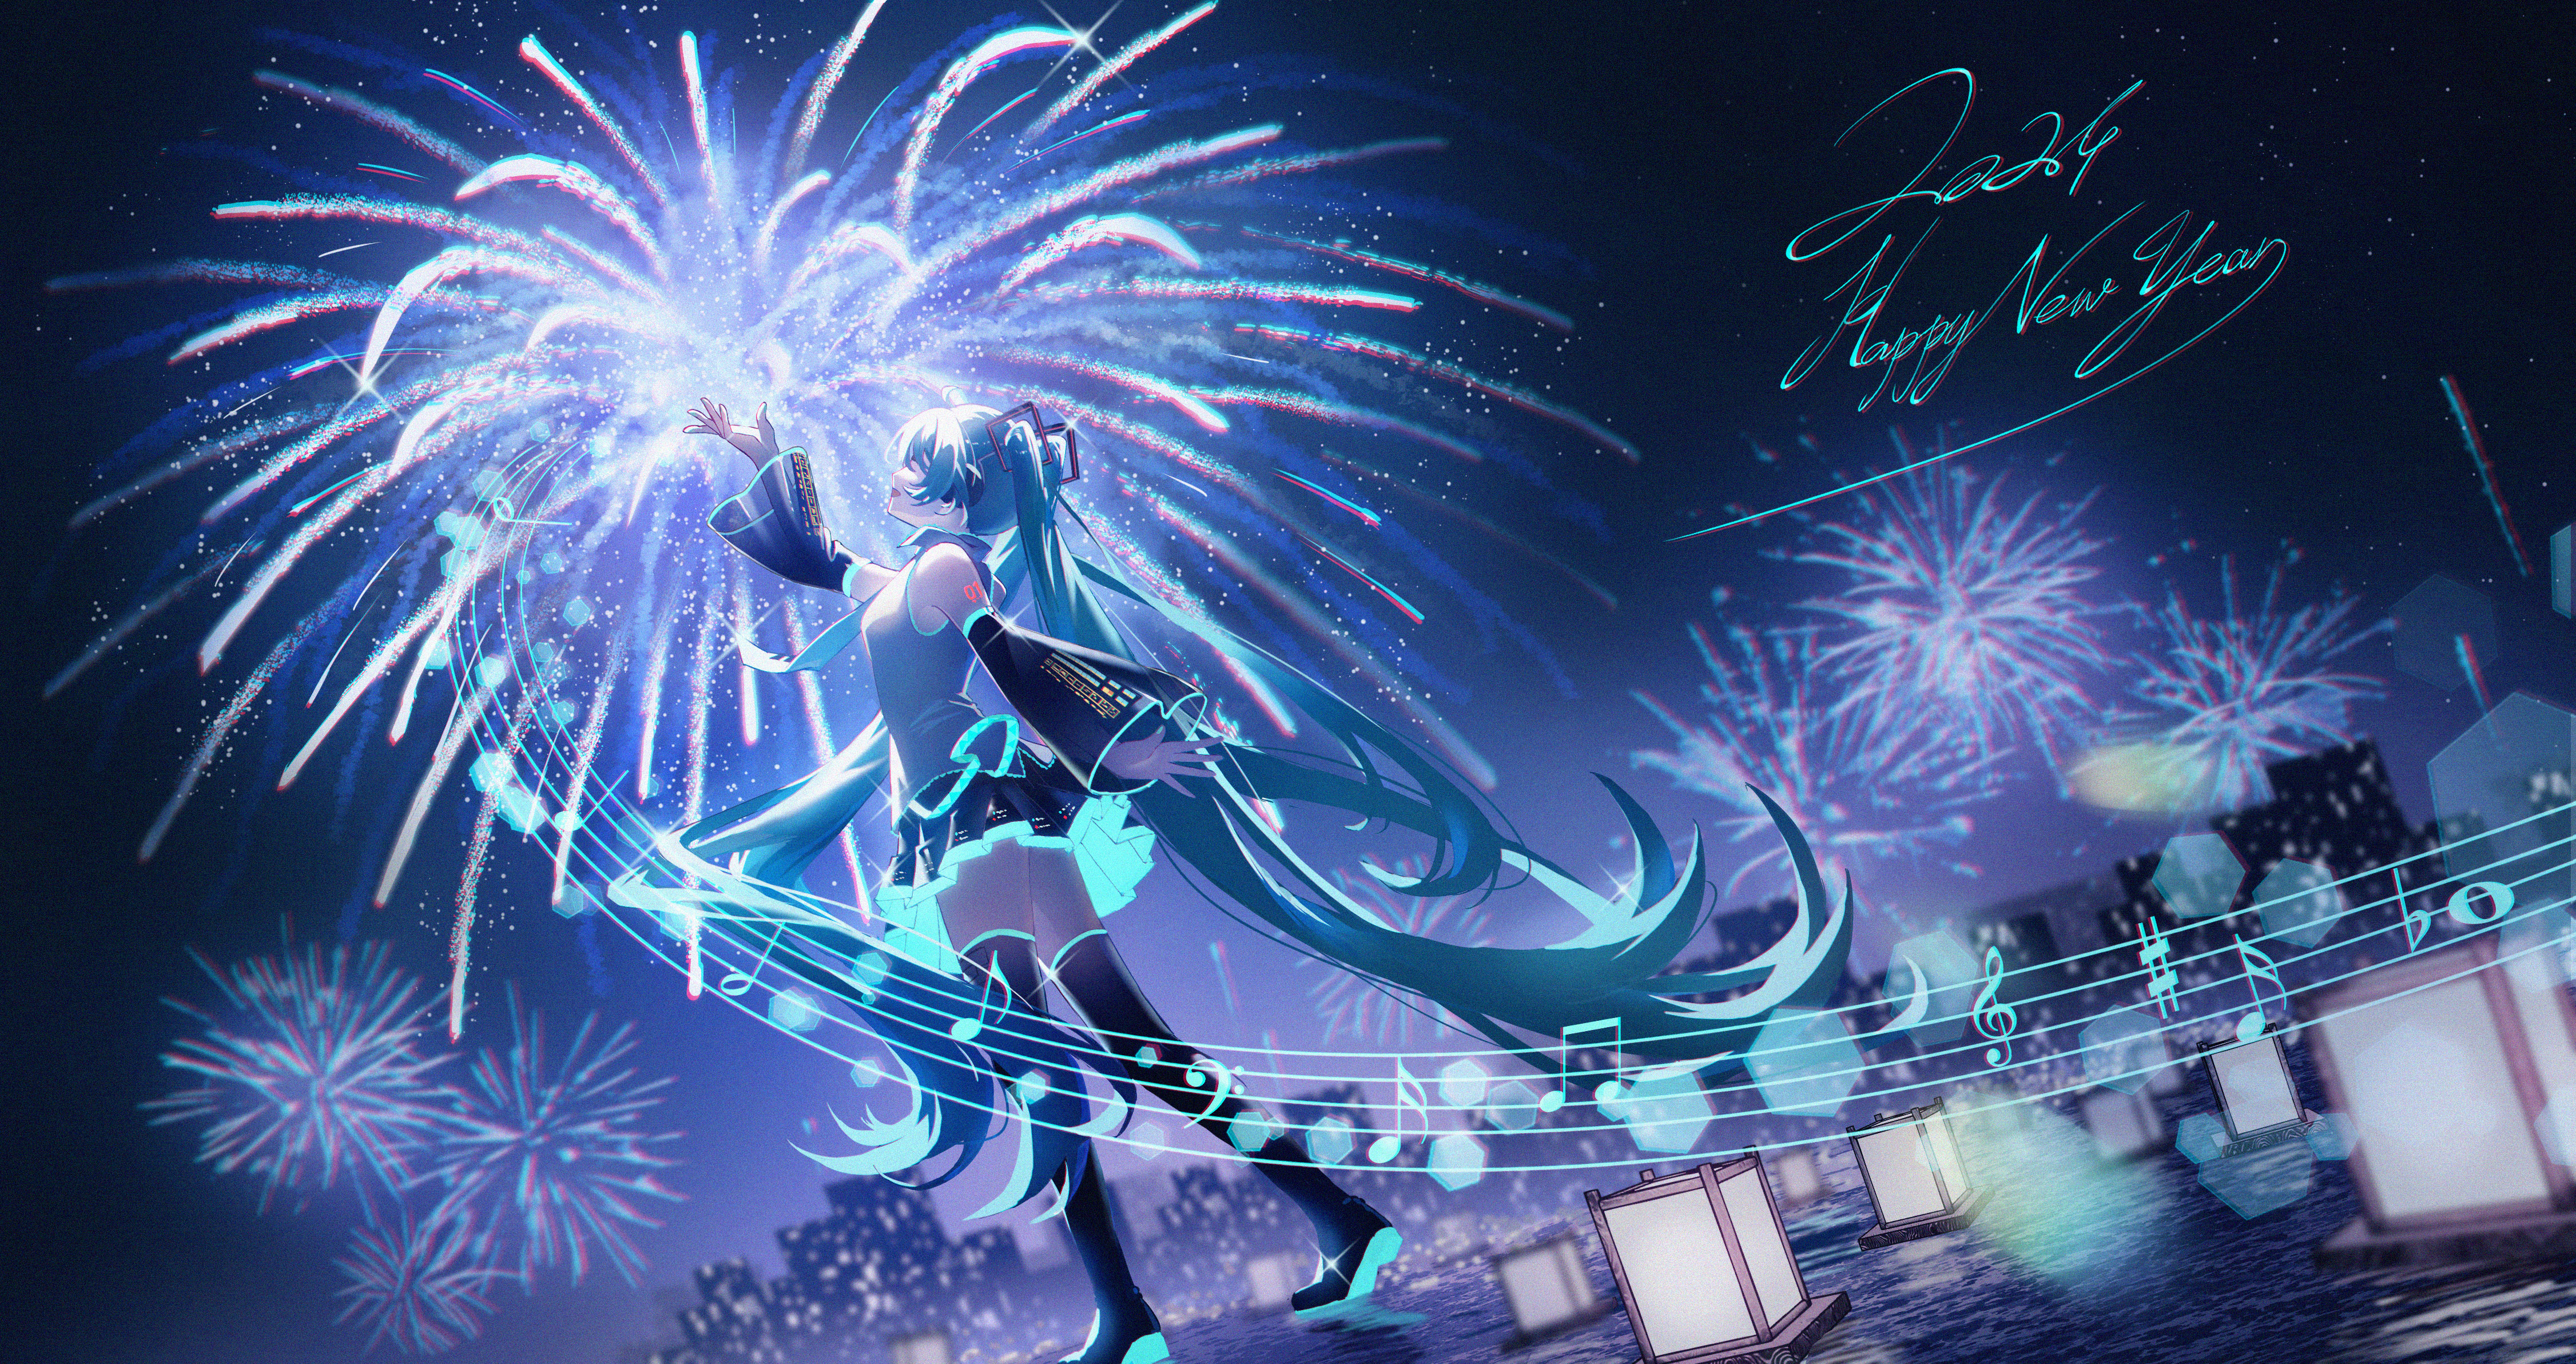 Anime 4504x2385 anime anime girls Hatsune Miku Pixiv ji ye fan sheng Vocaloid New Year 2024 (year) outdoors women outdoors musical notes fireworks blue hair open mouth detached sleeves long hair sleeveless shirt numbers city lights building water blue nails sky night skirt frills thigh-highs looking up standing stars